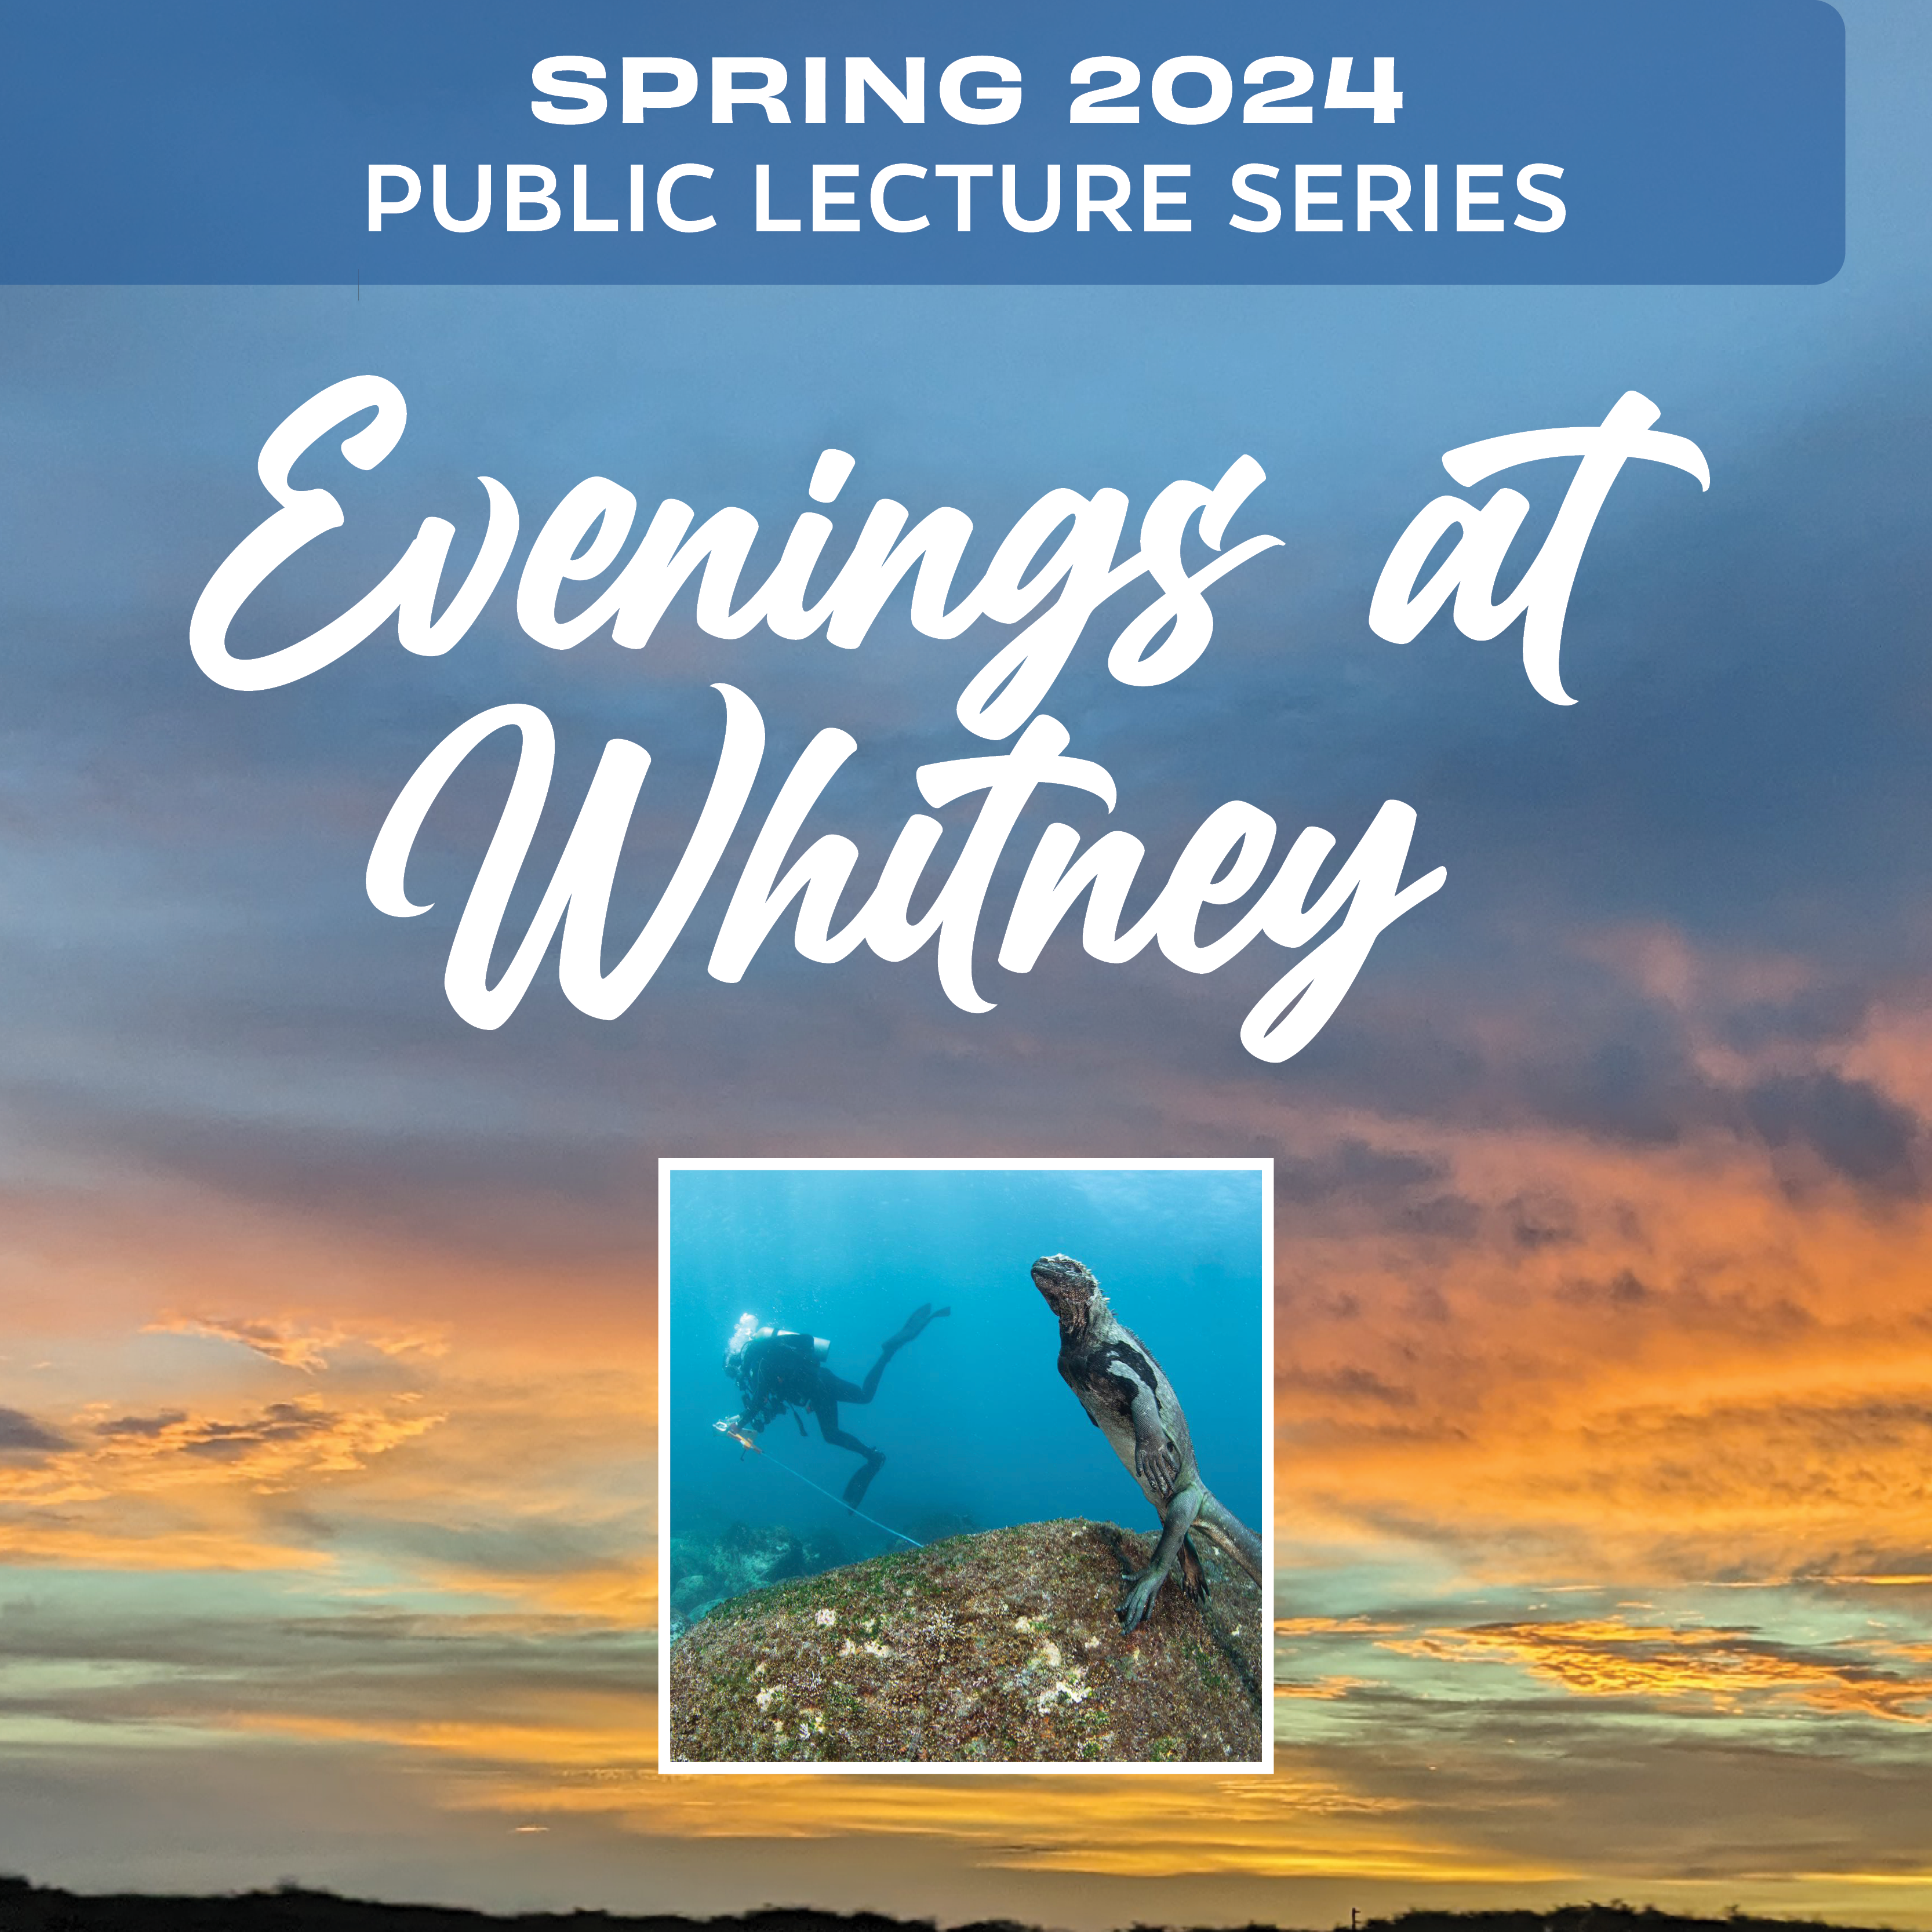 Evenings at Whitney March 14